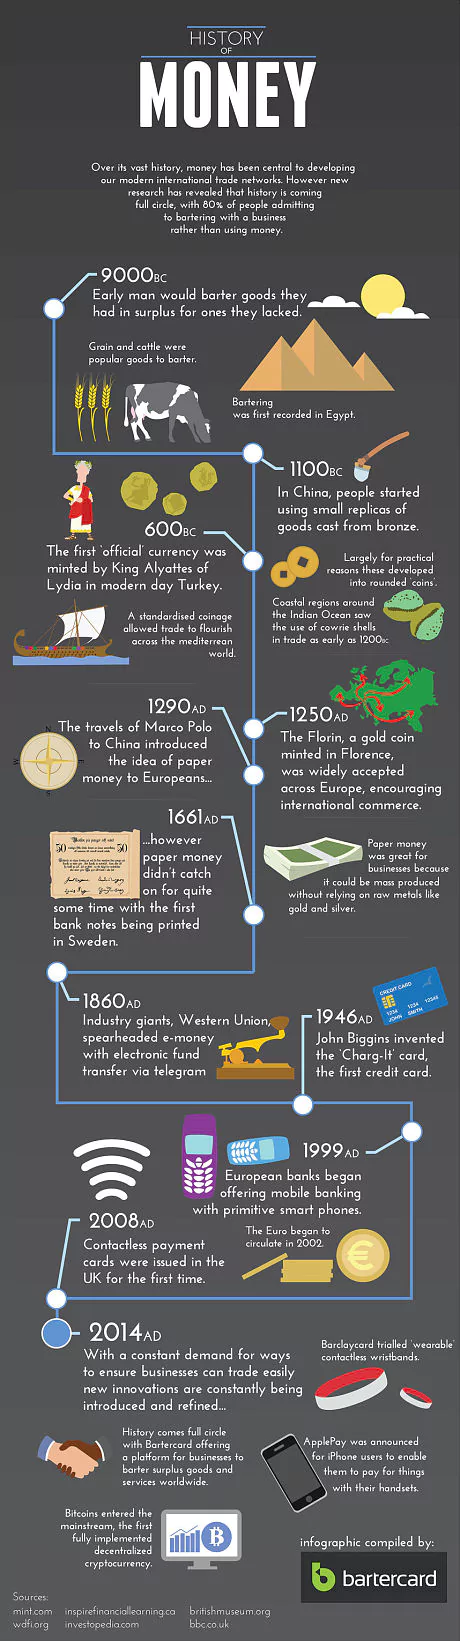 History of money The history of money from barter to bitcoin Telegraph